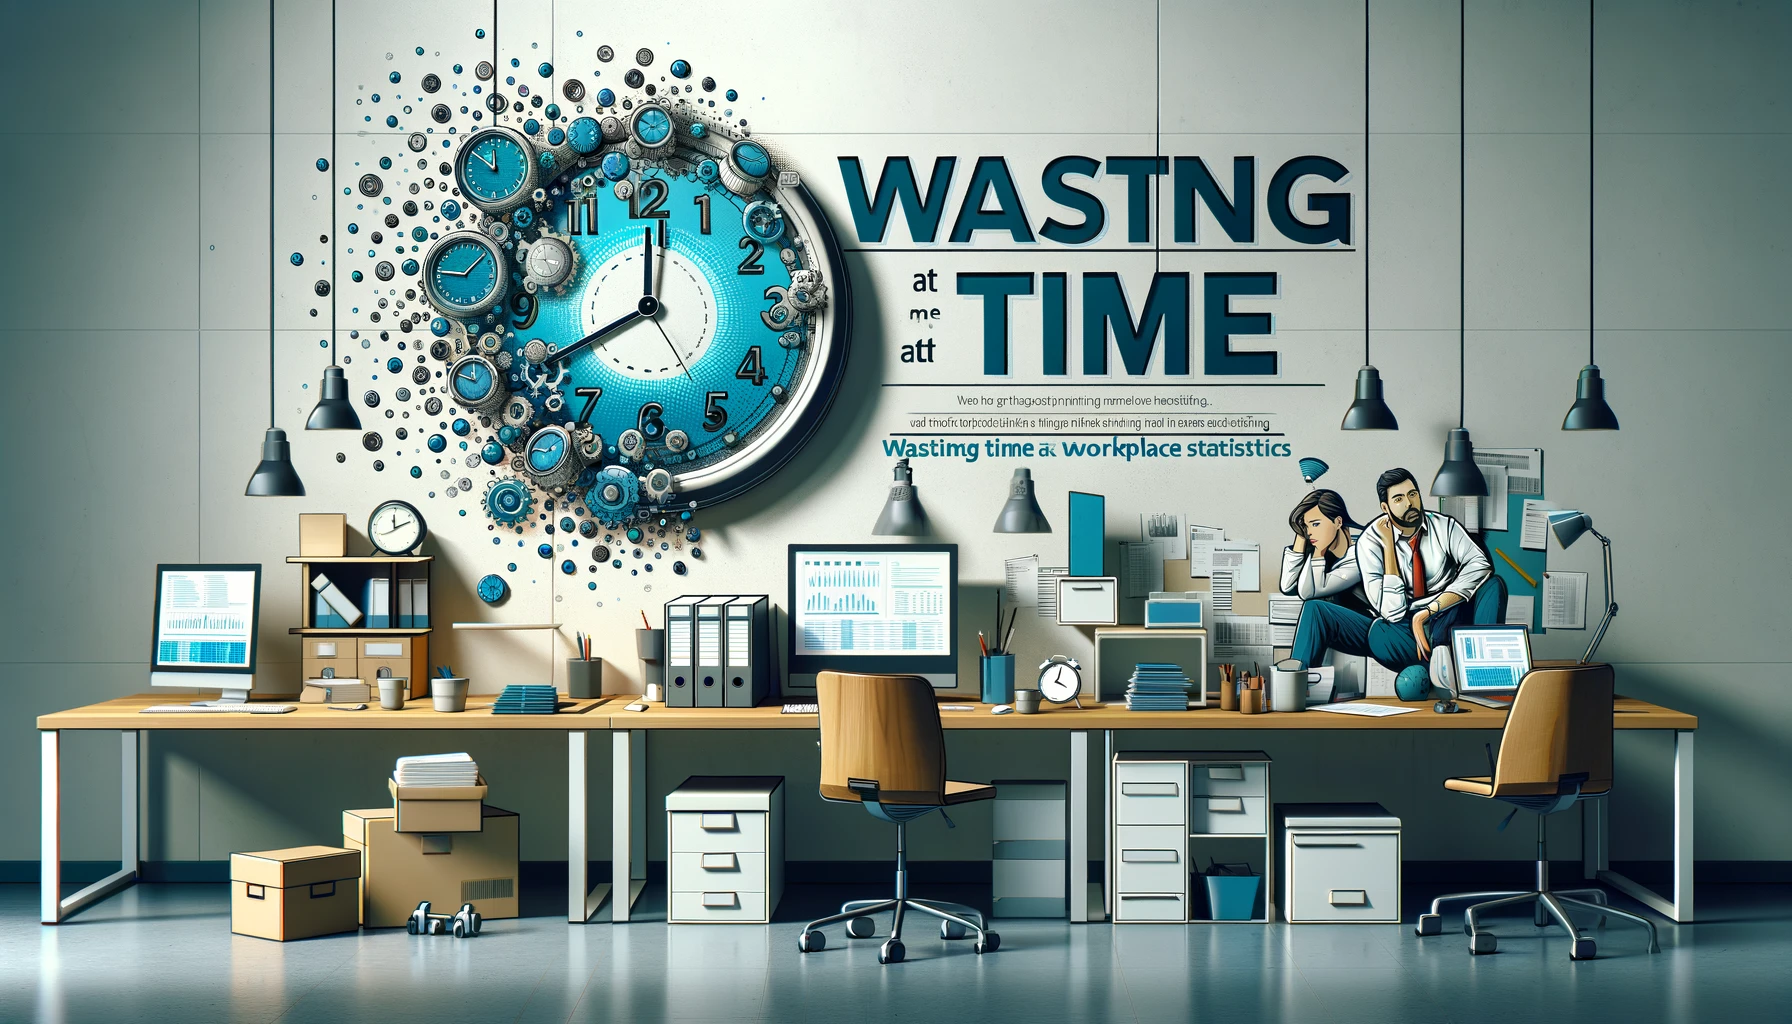 Wasting Time At Workplace Statistics By Gender, Distracting Activity, Use of Social Media, Age And Industries